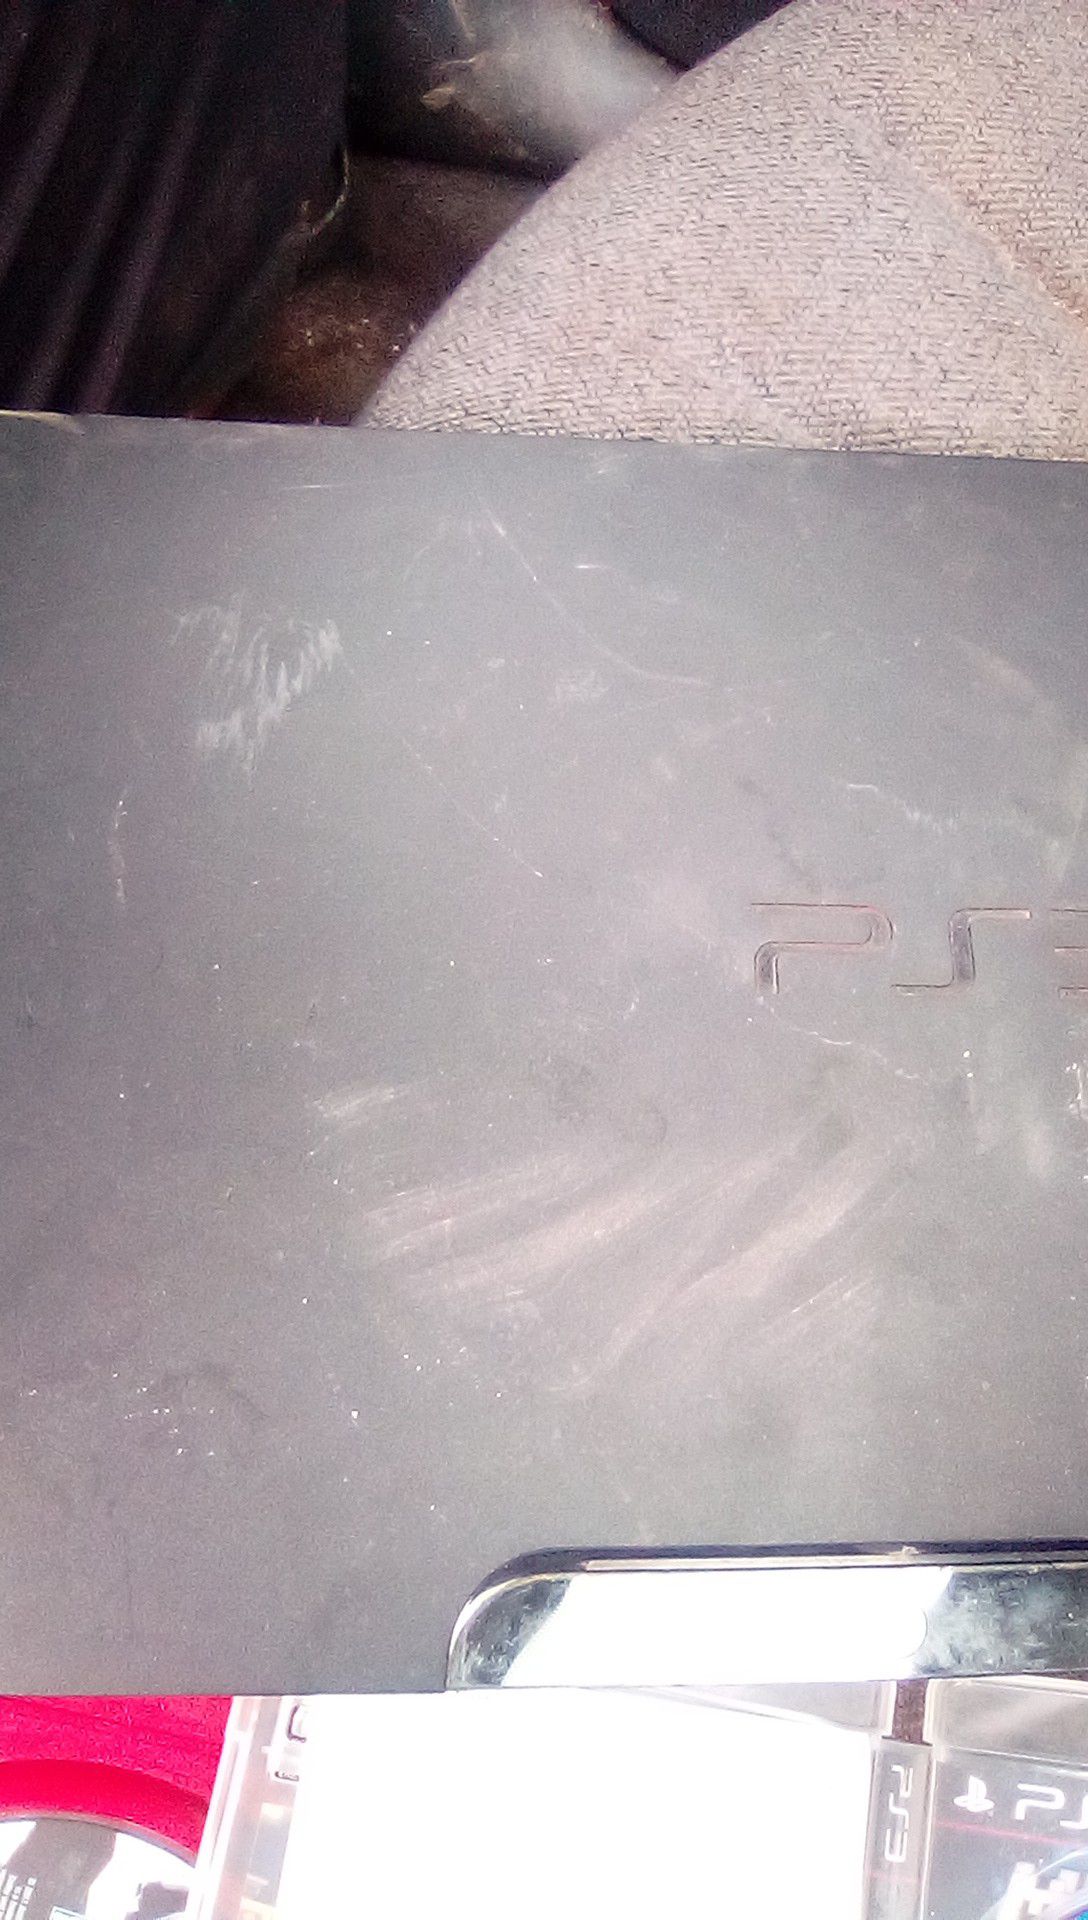 Ps3 console 2 games no control or cables